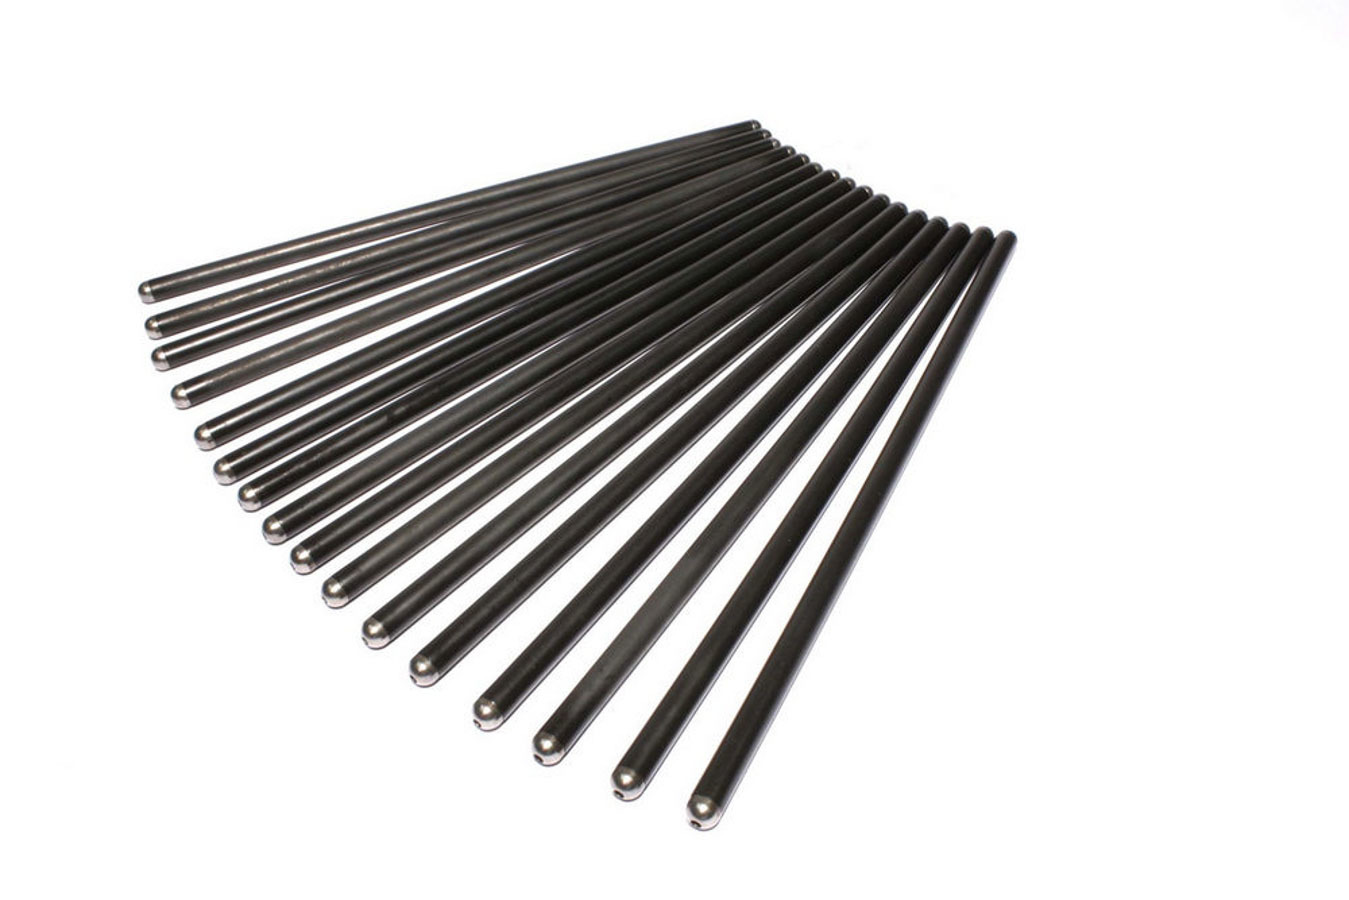 Comp Cams 7658-16 Pushrods, Magnum, 9.650 in Long, 5/16 in Diameter, 0.080 in Thick Wall, Chromoly, Black Oxide, Set of 16